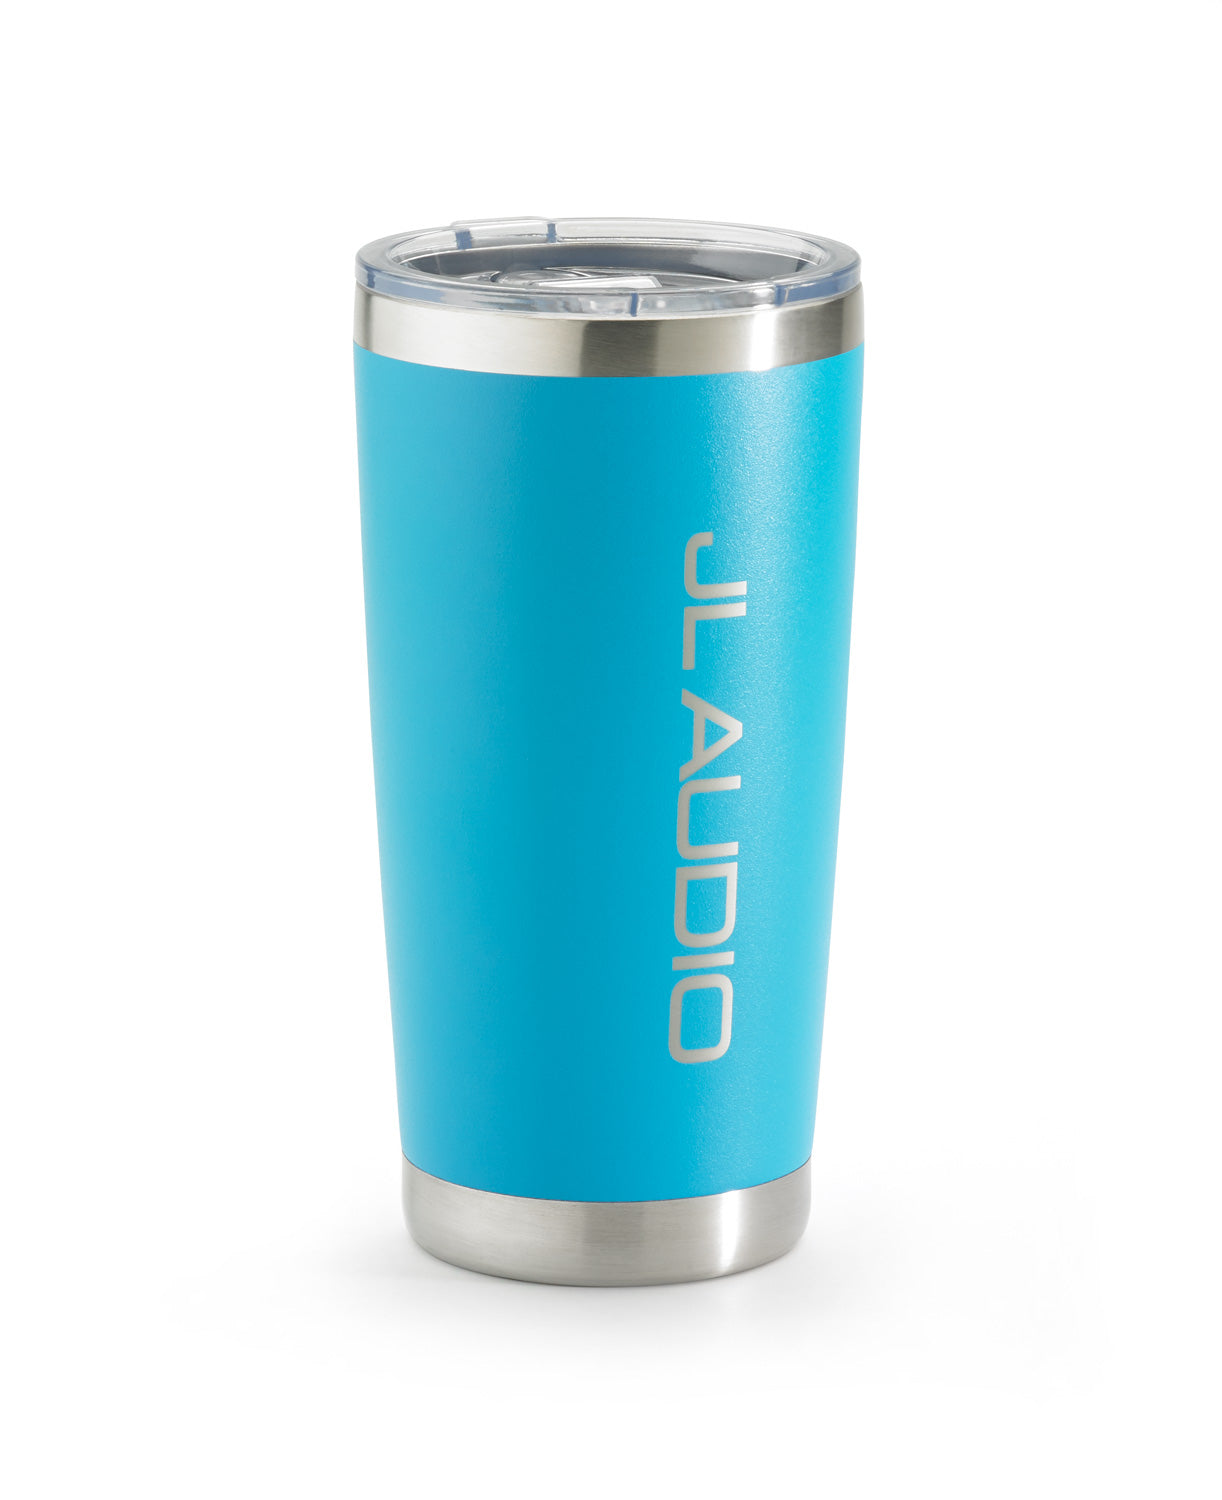 Bright Blue Tumbler with lid and JL Audio logo